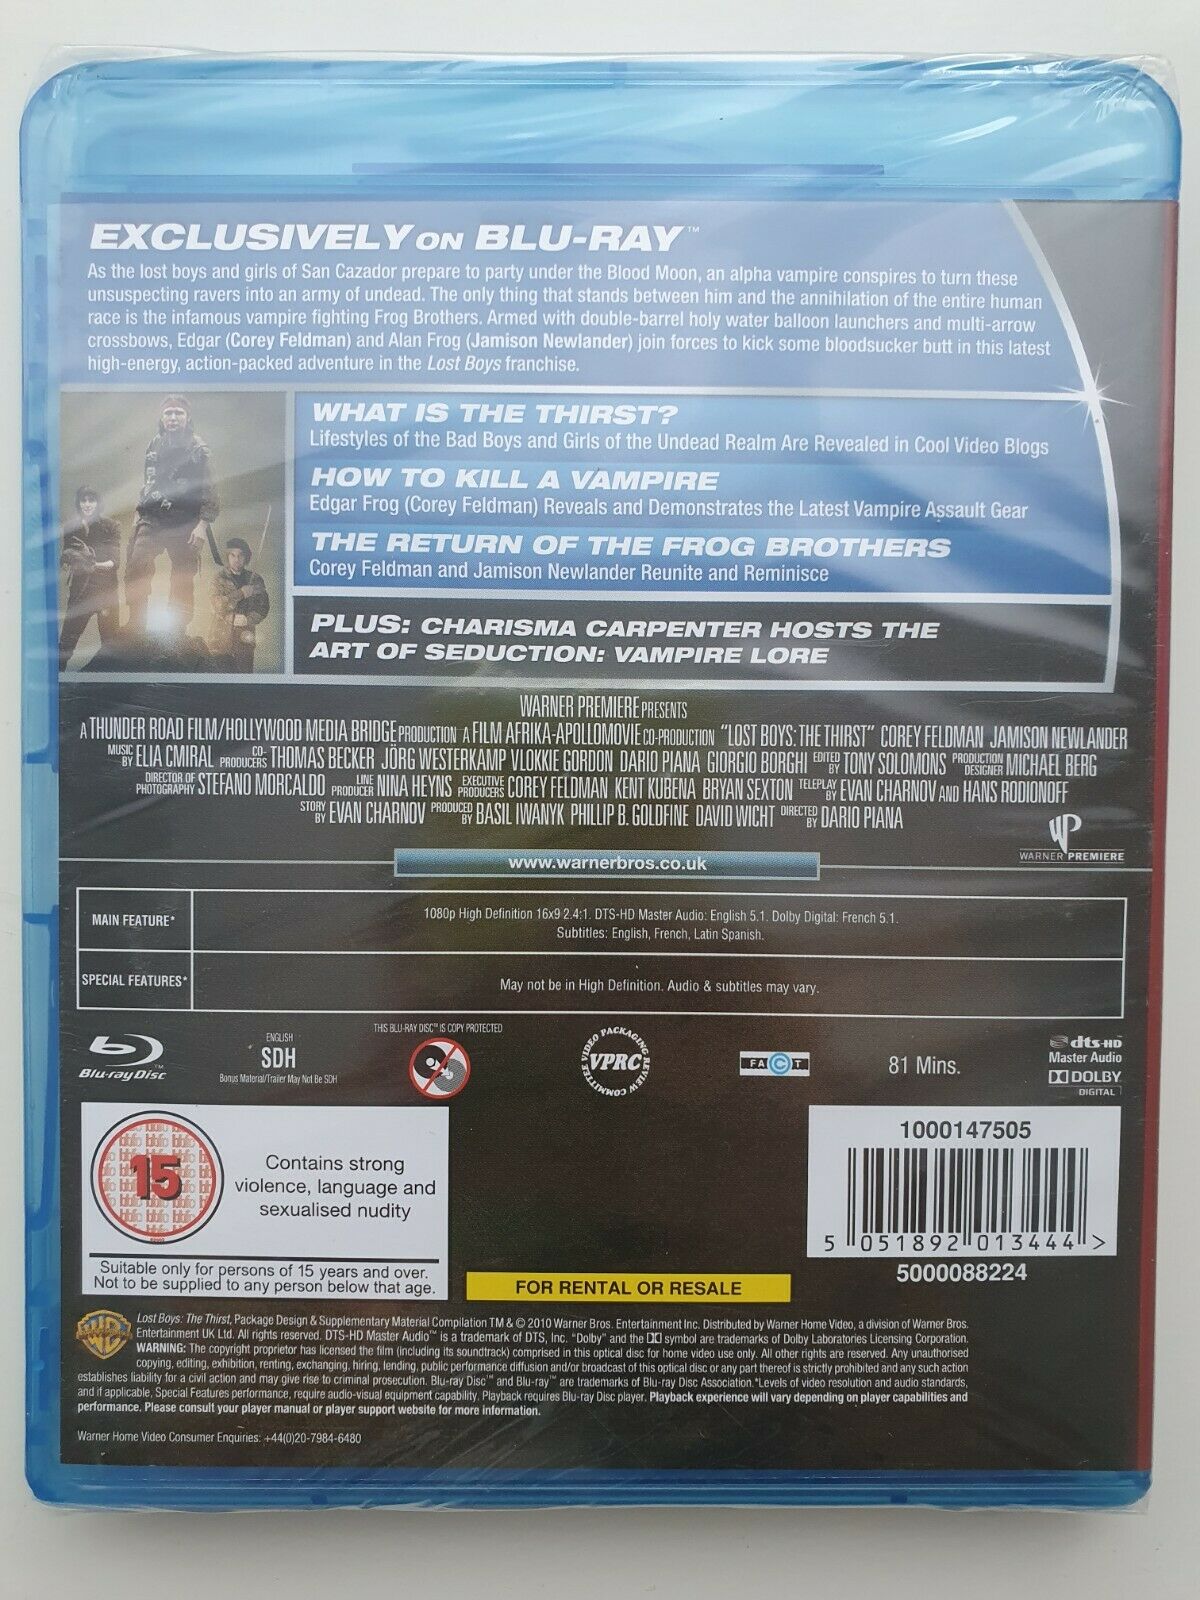 5051892013444 The Lost Boys 3 - The Thirst Blu-ray 2010